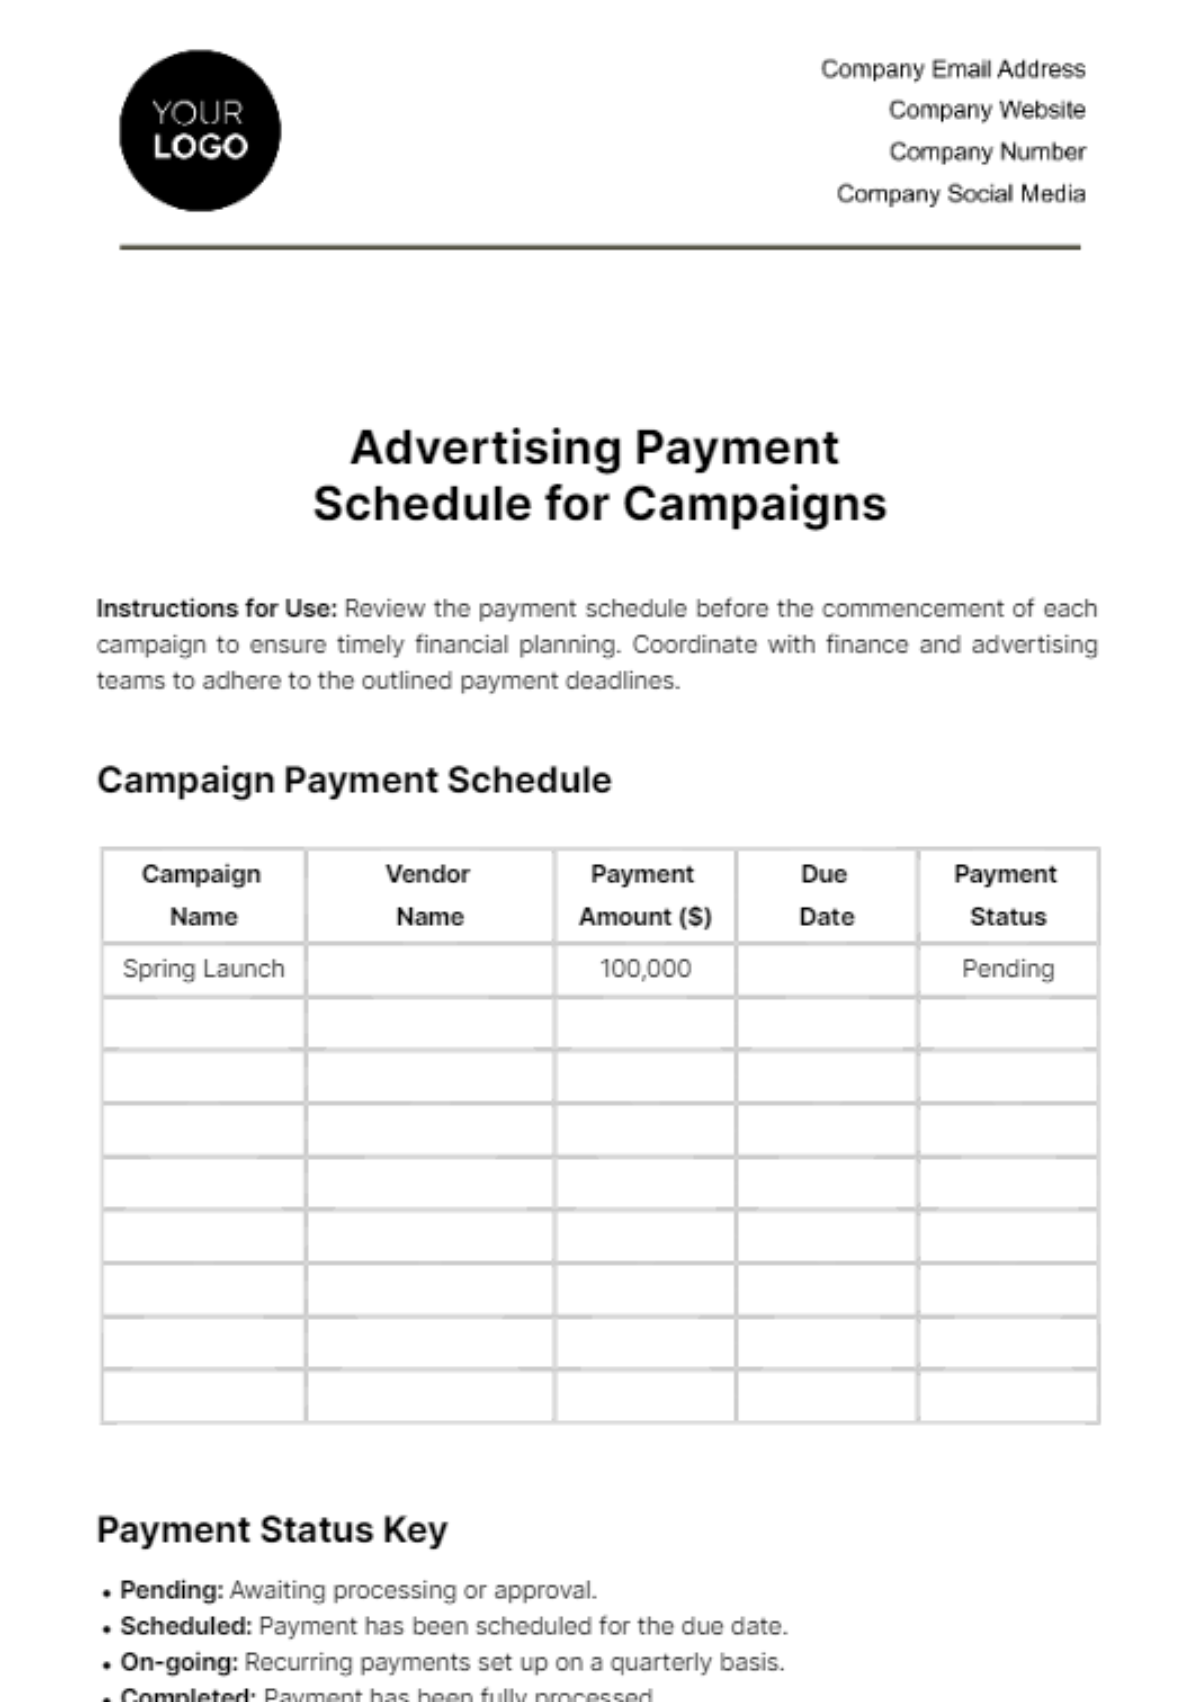 Free Advertising Payment Schedule for Campaigns Template